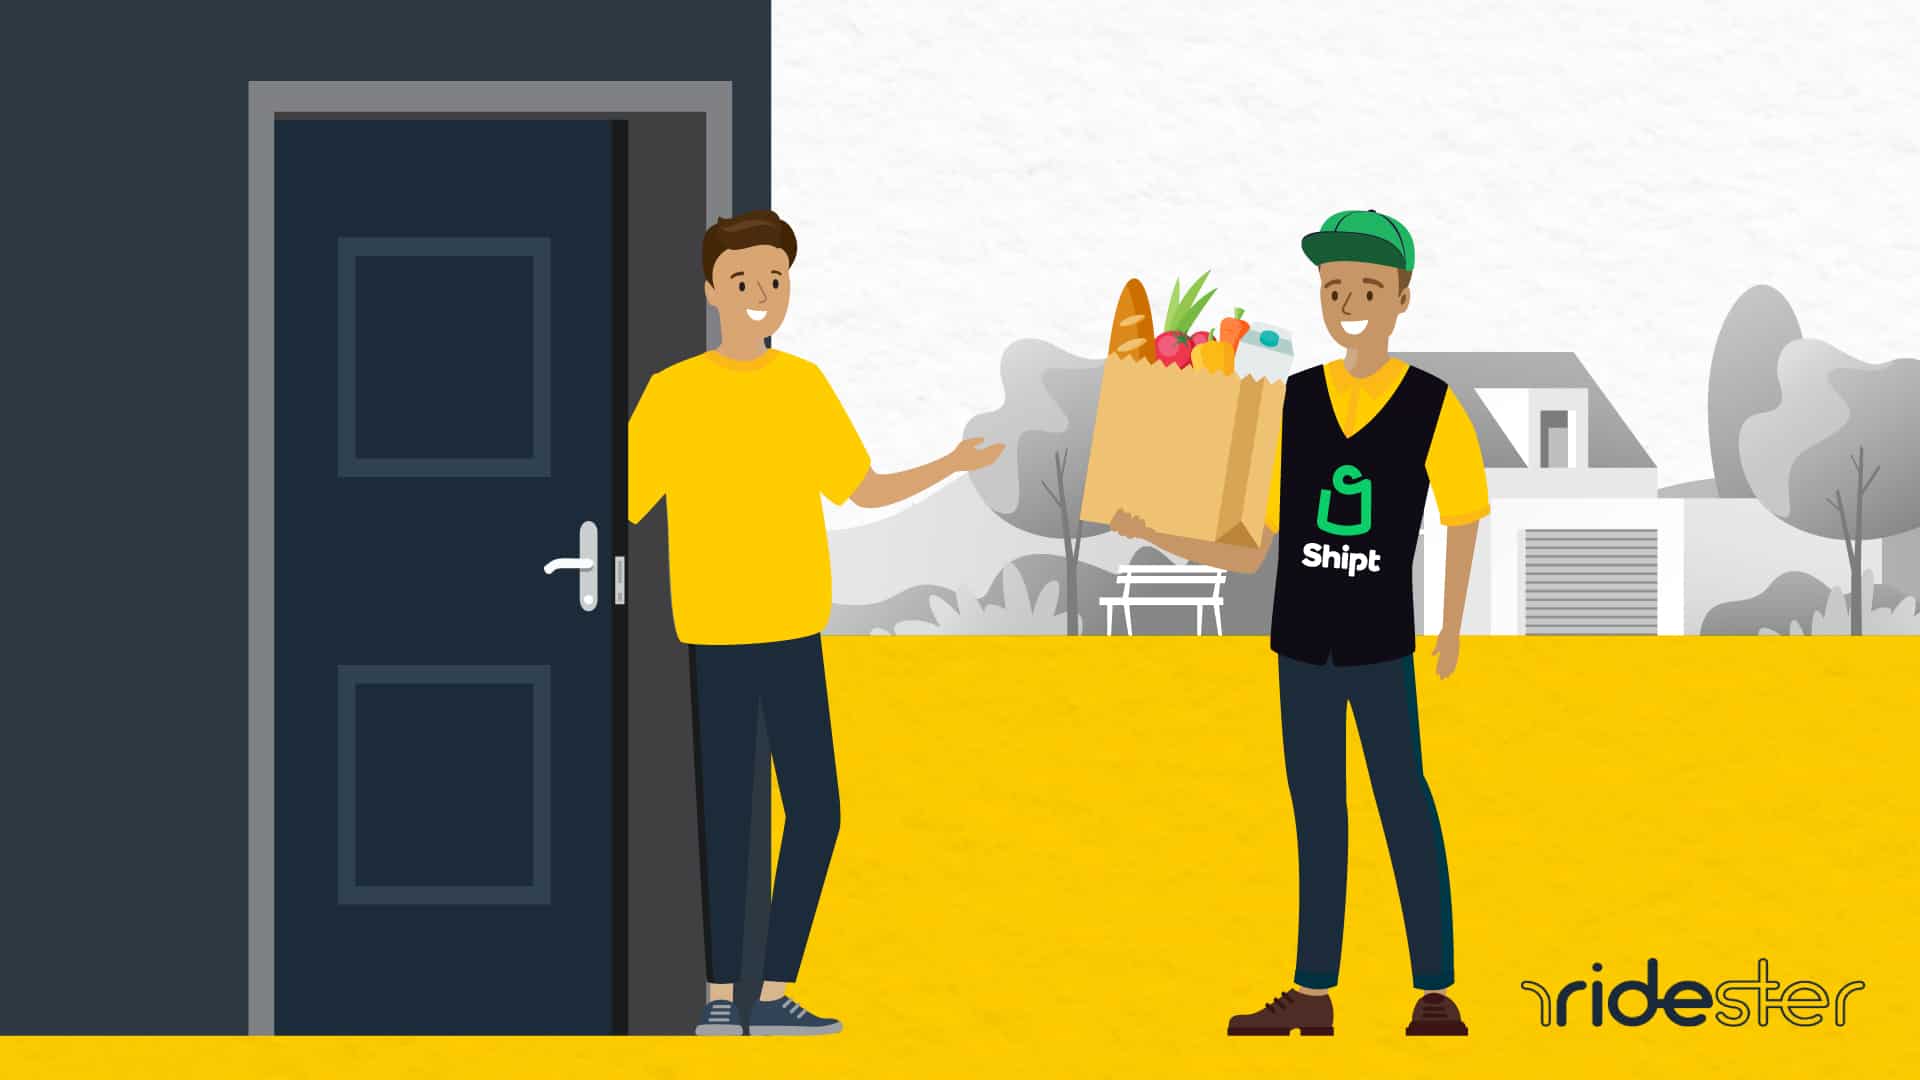 vector image of a man holding a food delivery and the customer abiding by Shipt tipping best practices and offering the delivery person a cash tip